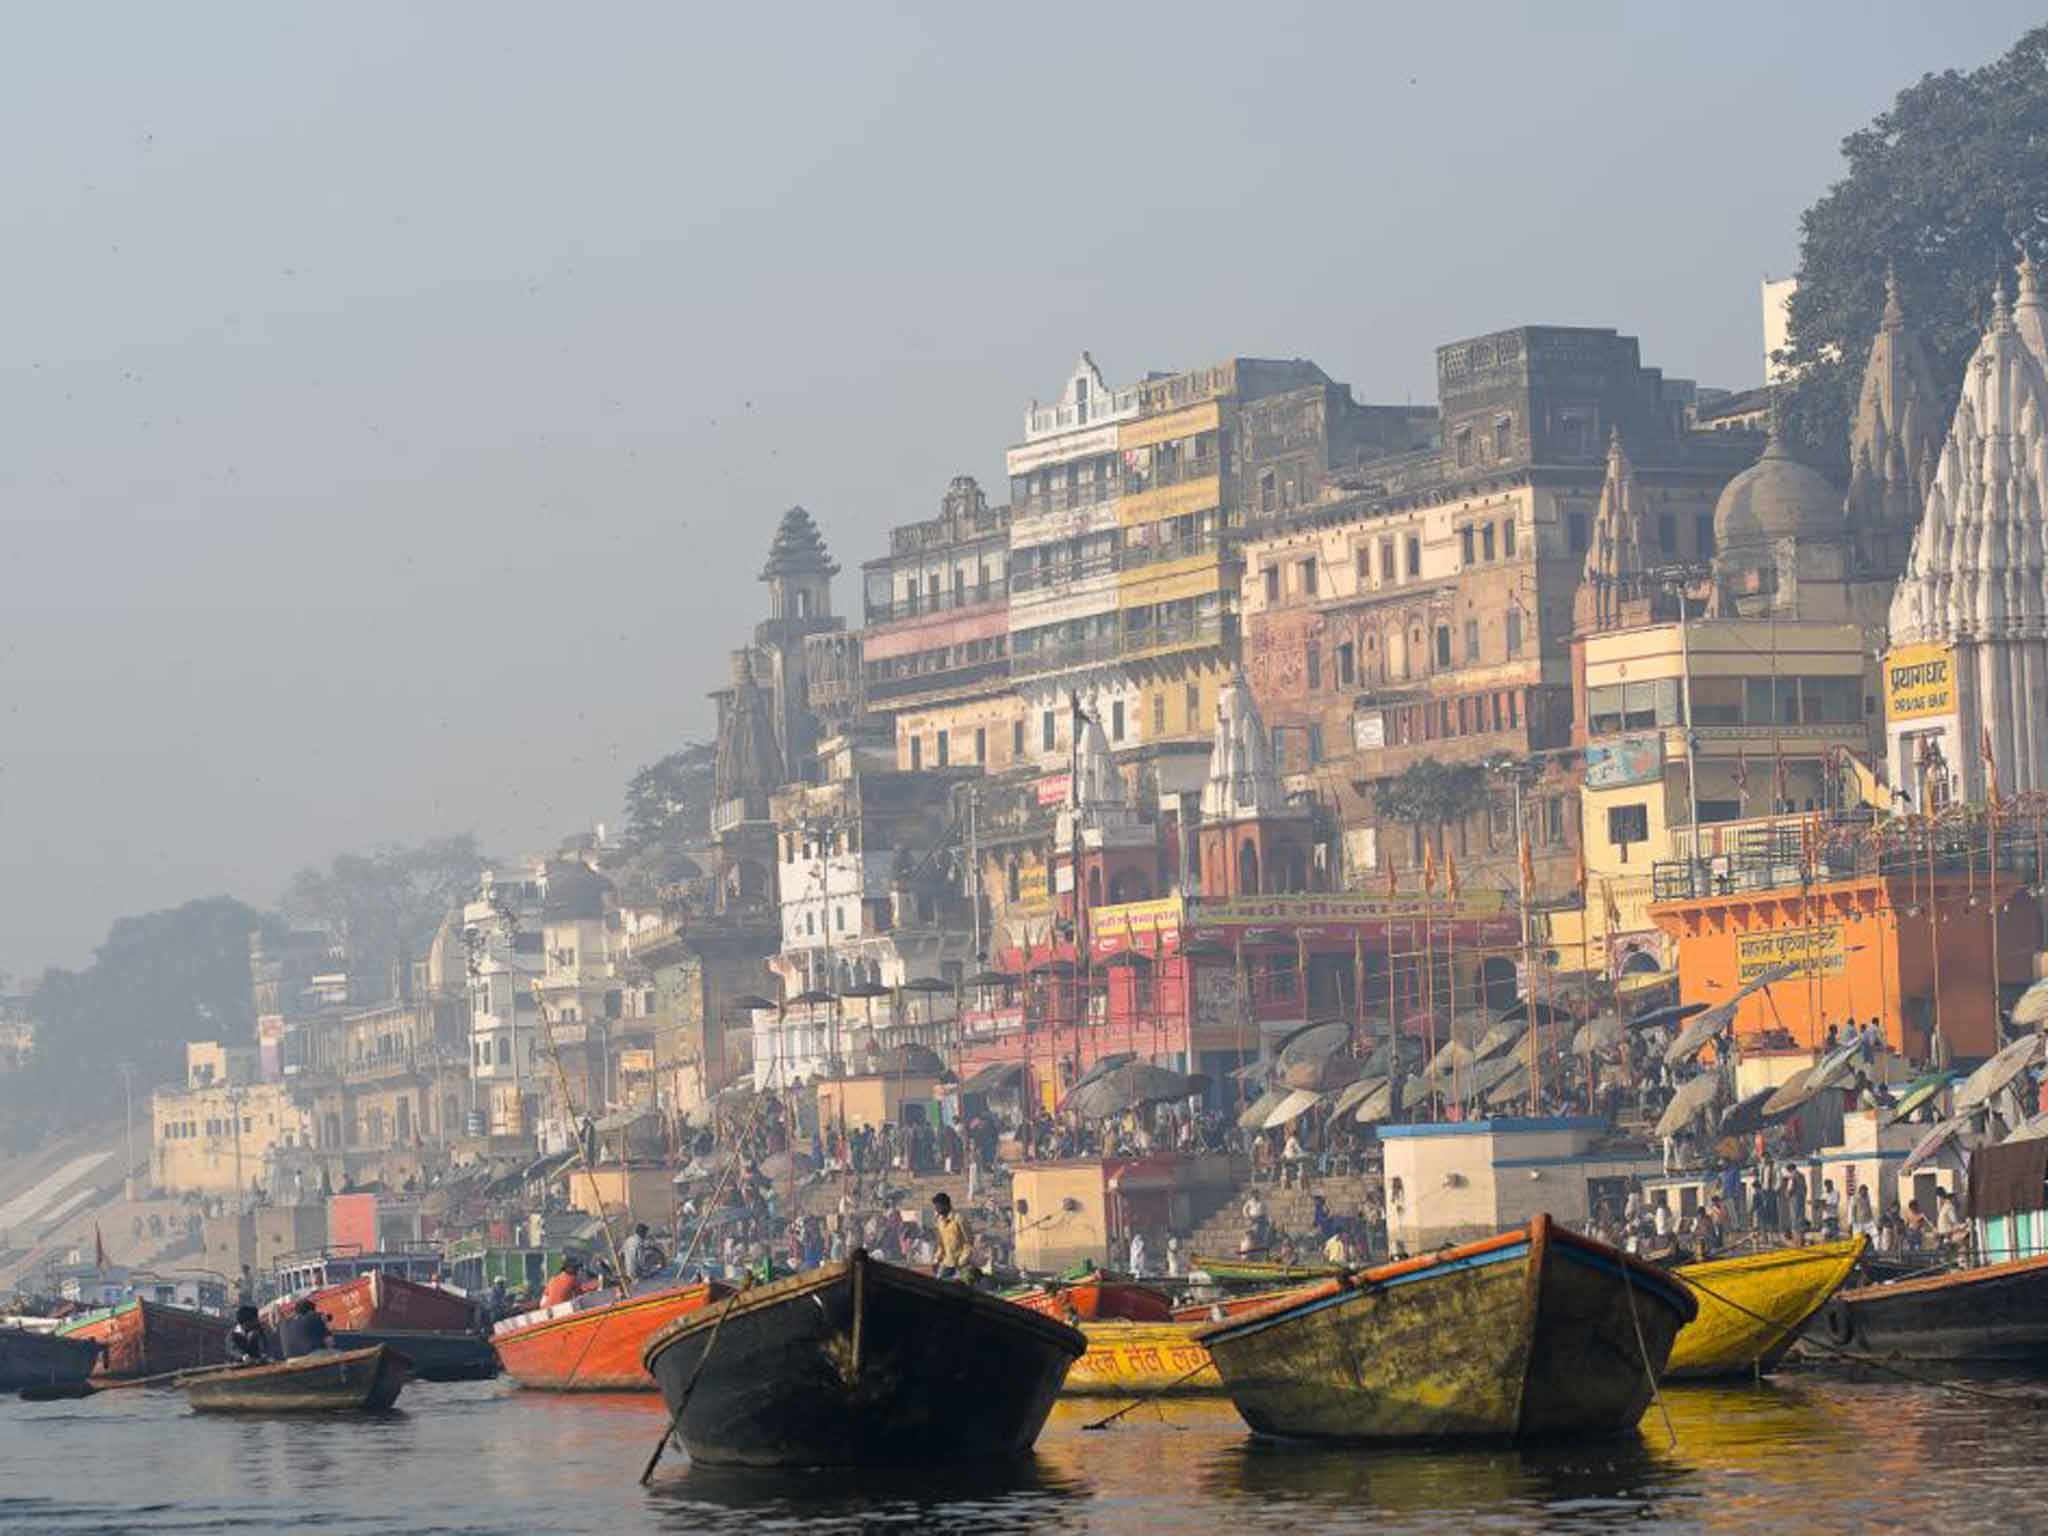 The Ganges at dawn